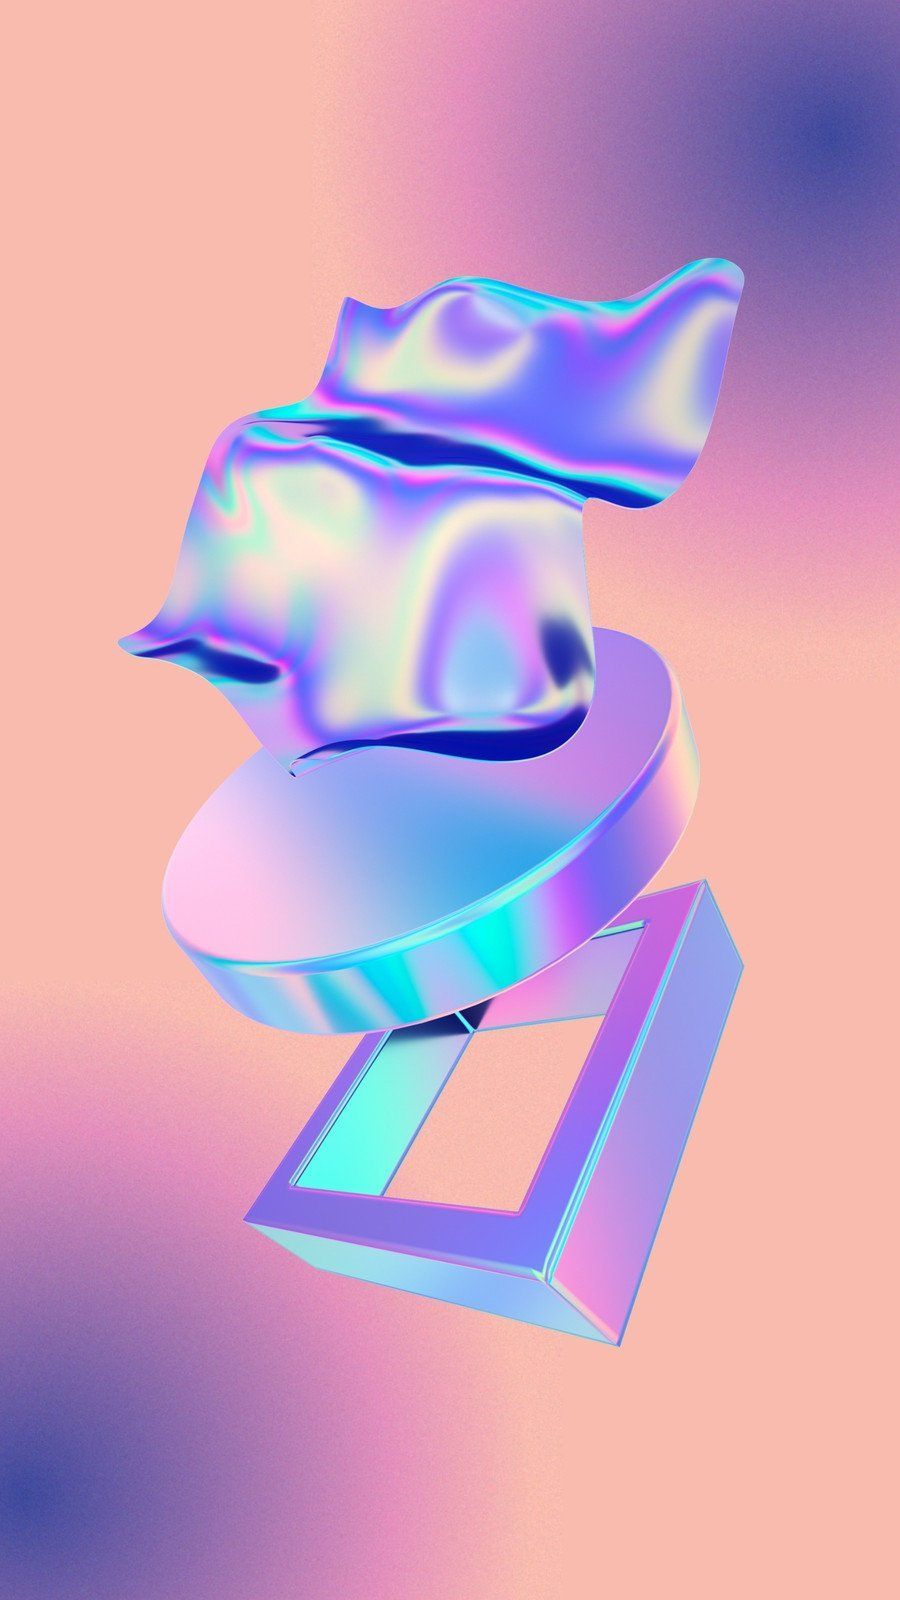 3D illustration of a cat on a pink and blue background - Iridescent